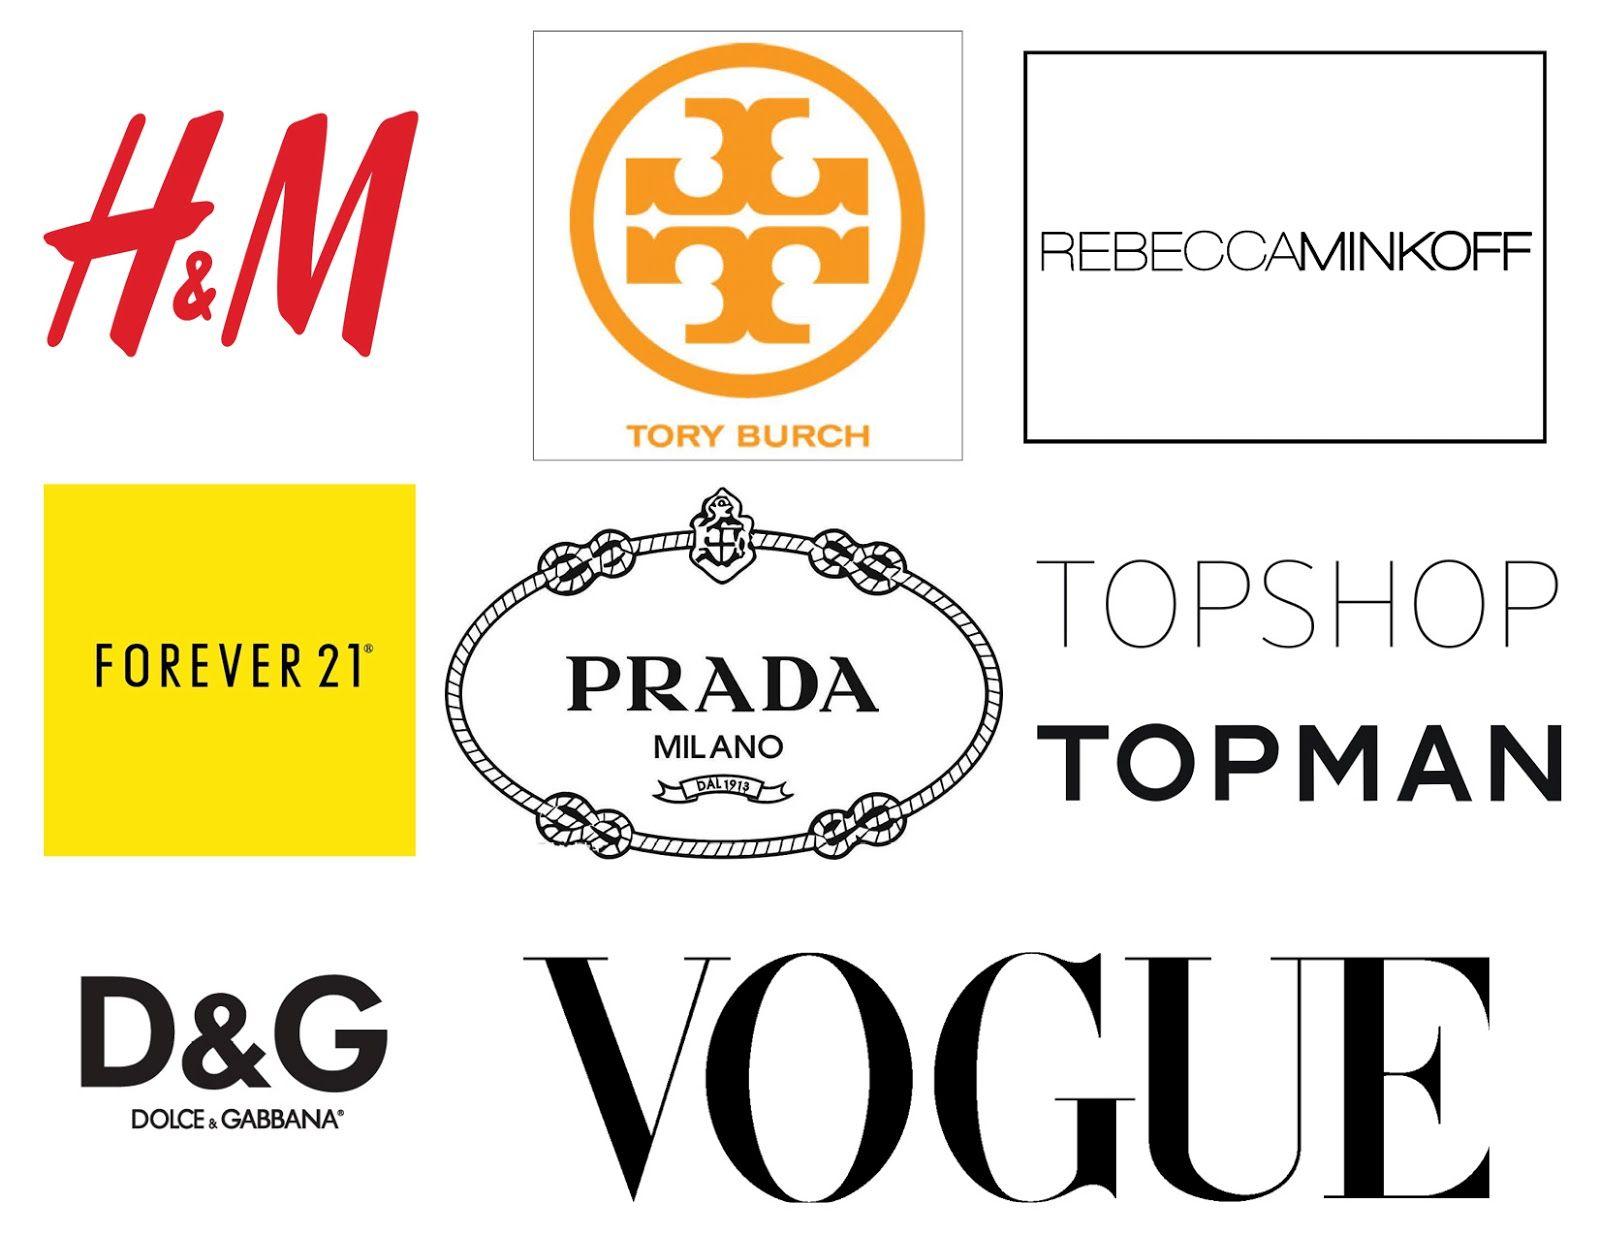 Famous Clothing Designer Logo - Famous Brand Logos Of Clothes Picture to Pin, Famous